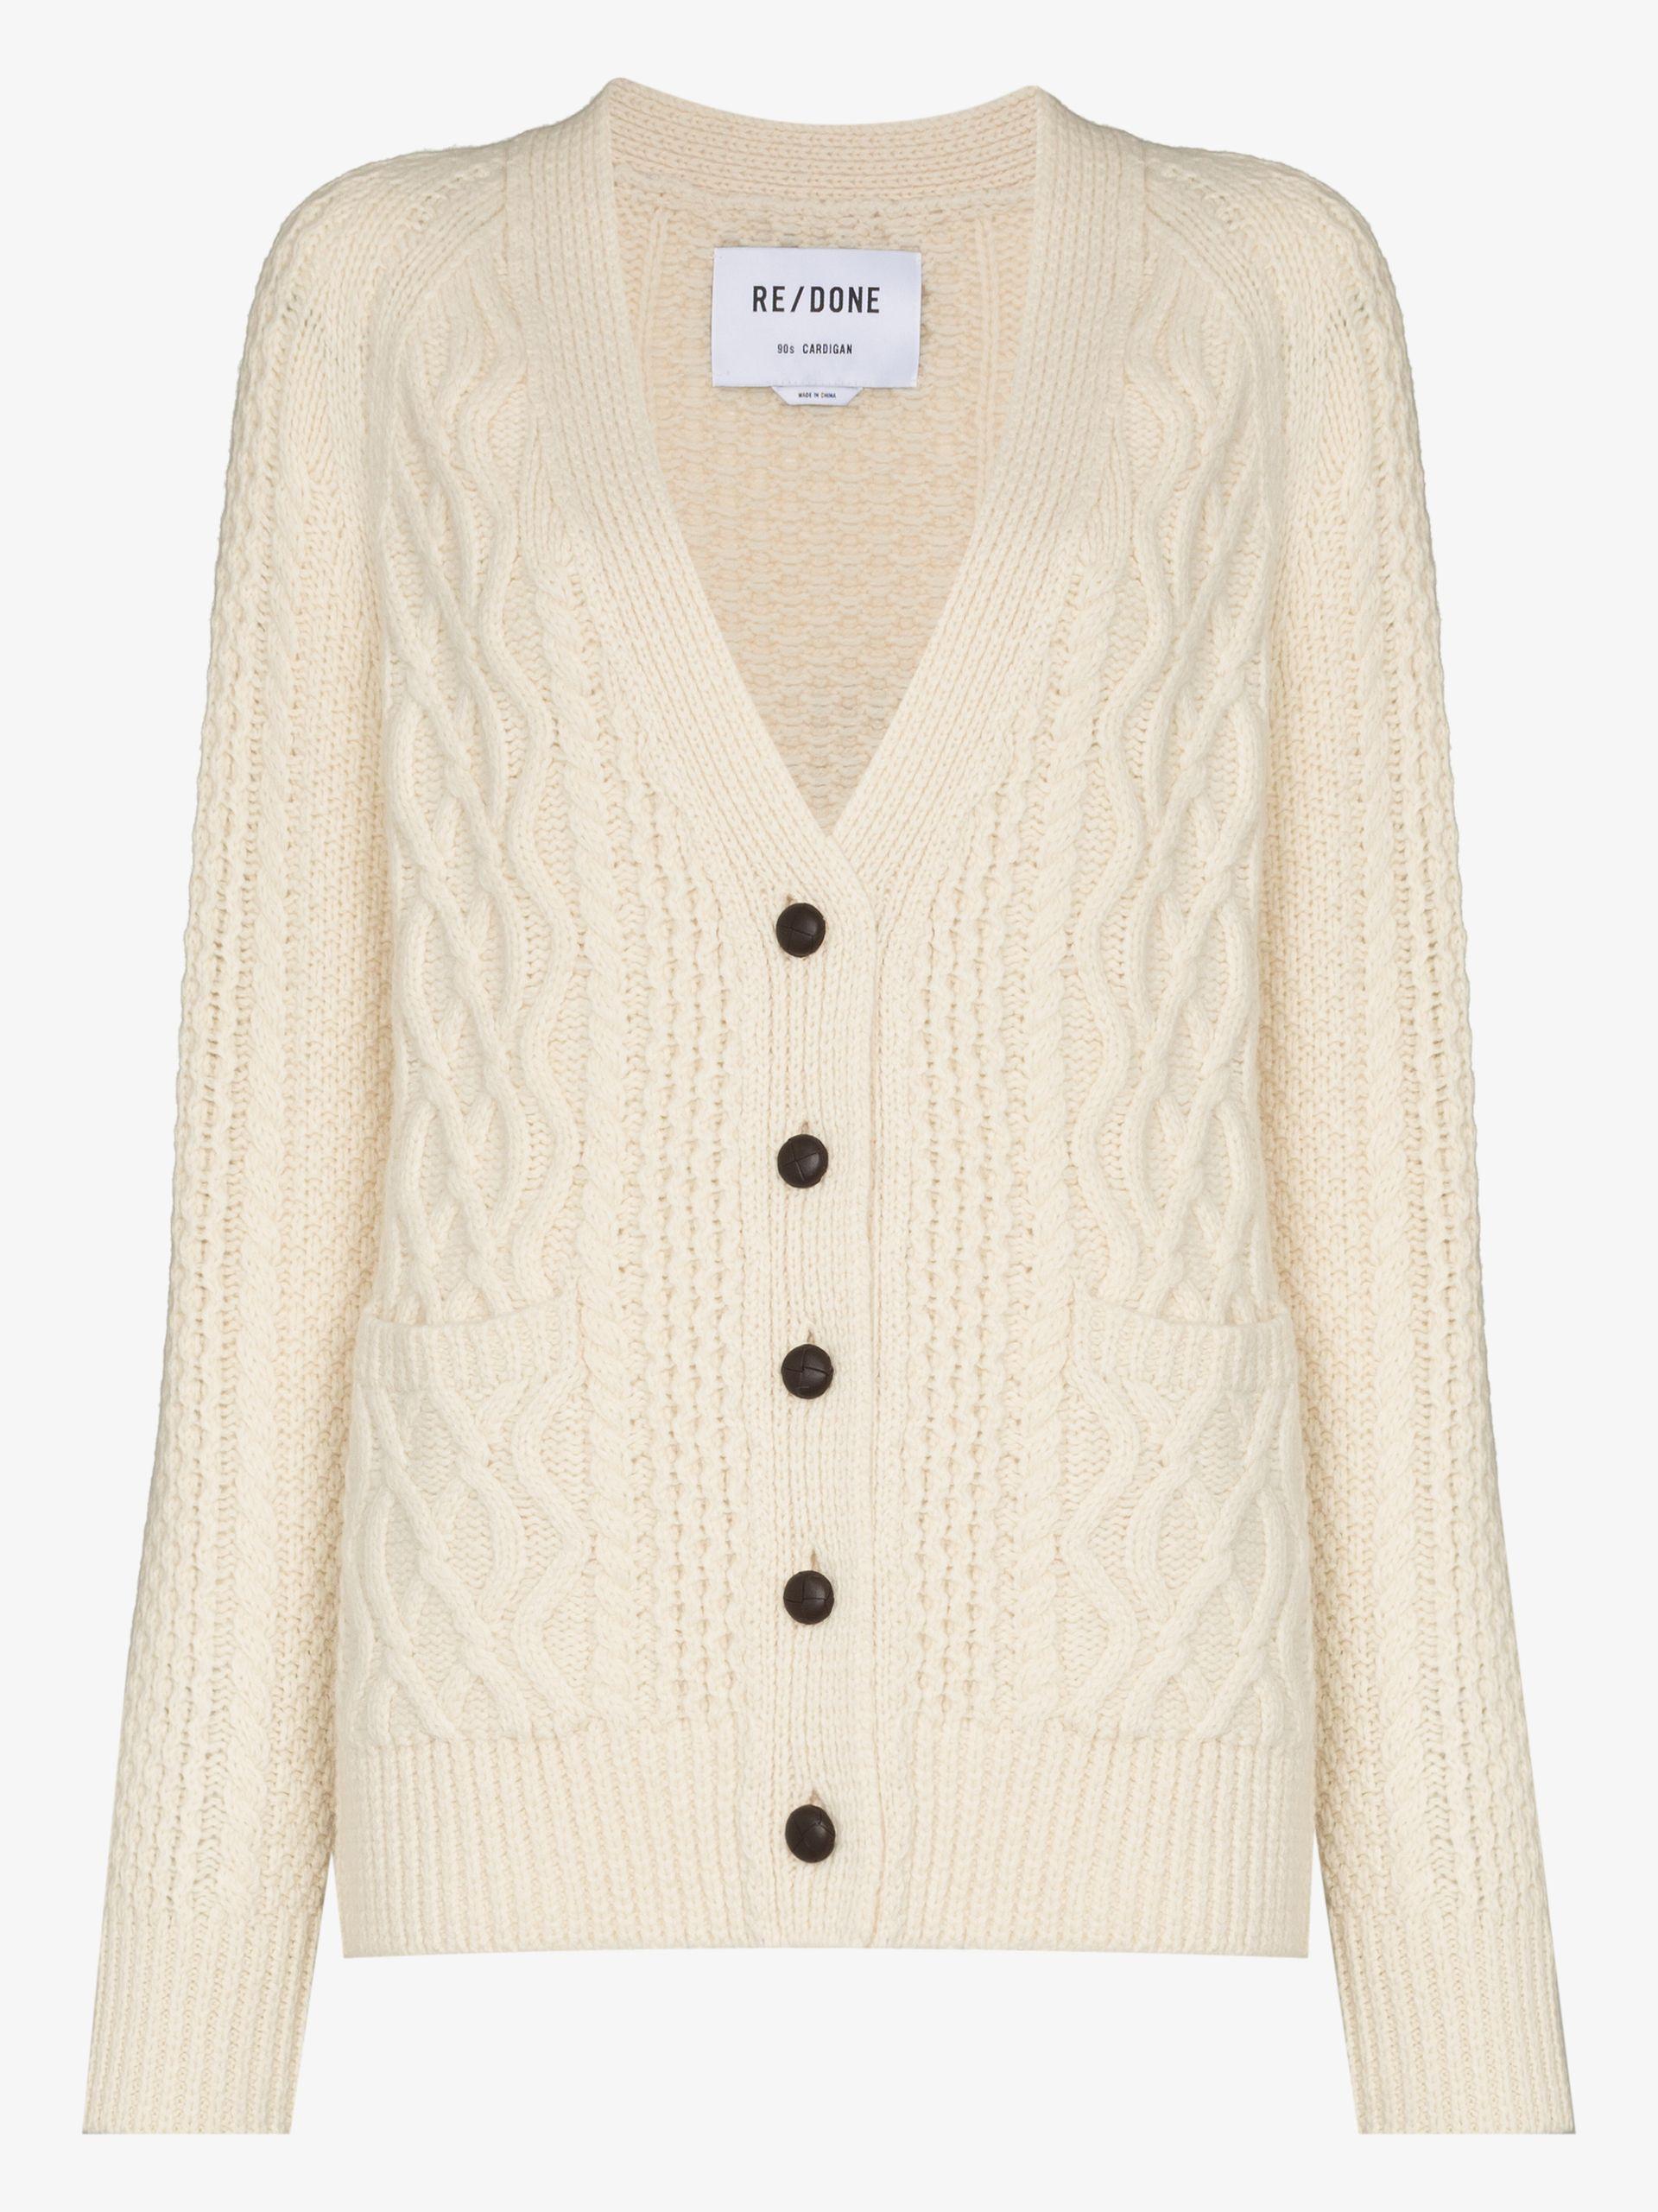 RE/DONE '90s Cable Knit Wool Cardigan in Natural | Lyst